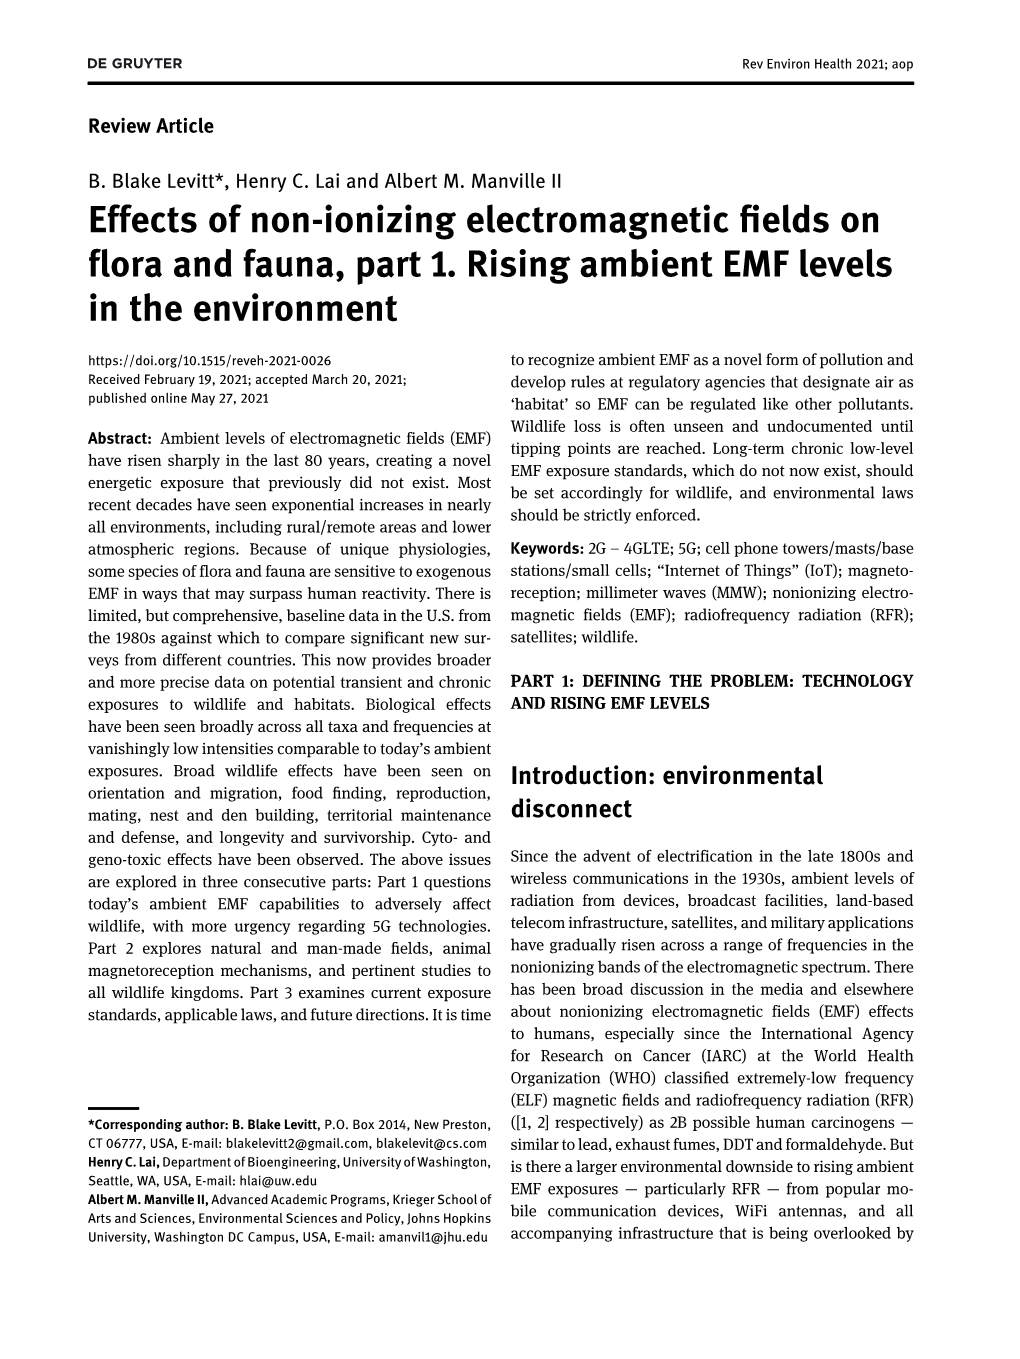 Effects of Non-Ionizing Electromagnetic Fields on Flora and Fauna, Part 1. Rising Ambient EMF Levels in the Environment